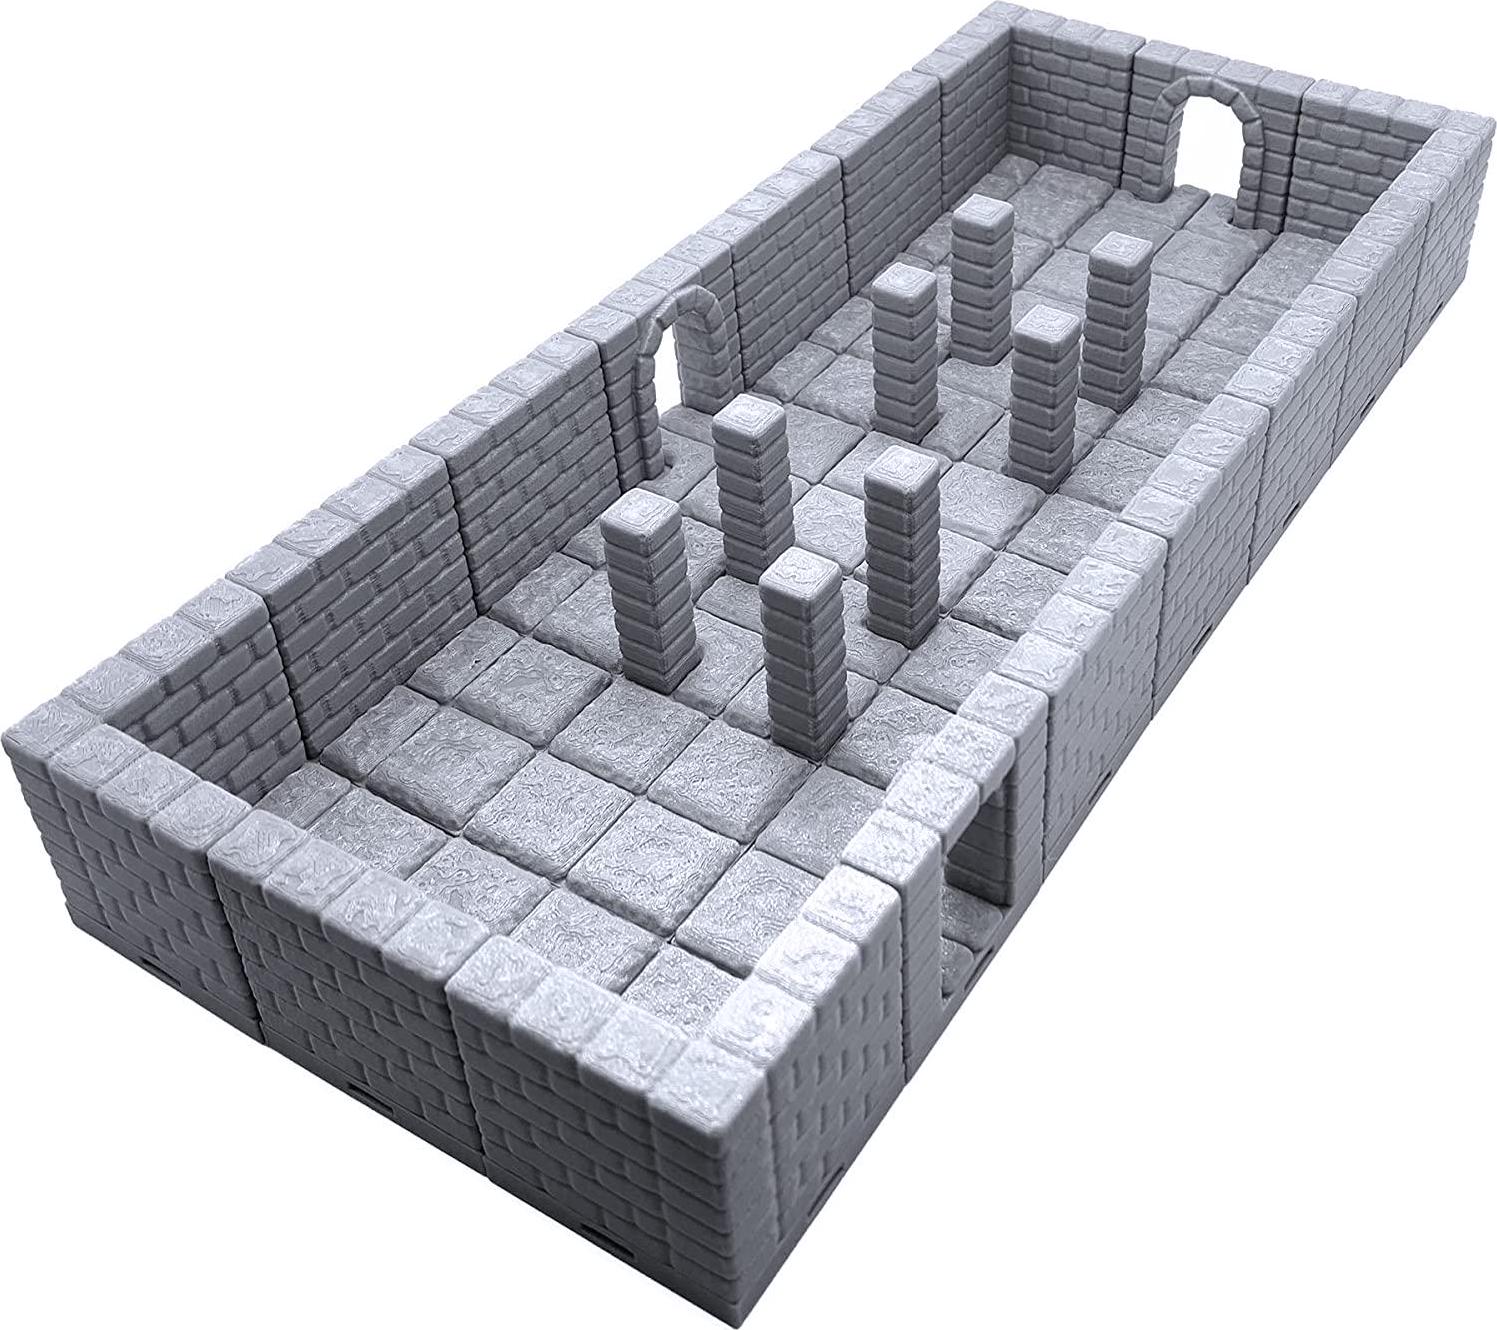 EnderToys, Locking Dungeon Tiles - Pillar Room, Terrain Scenery Tabletop 28mm Miniatures Role Playing Game, 3D Printed Paintable, EnderToys